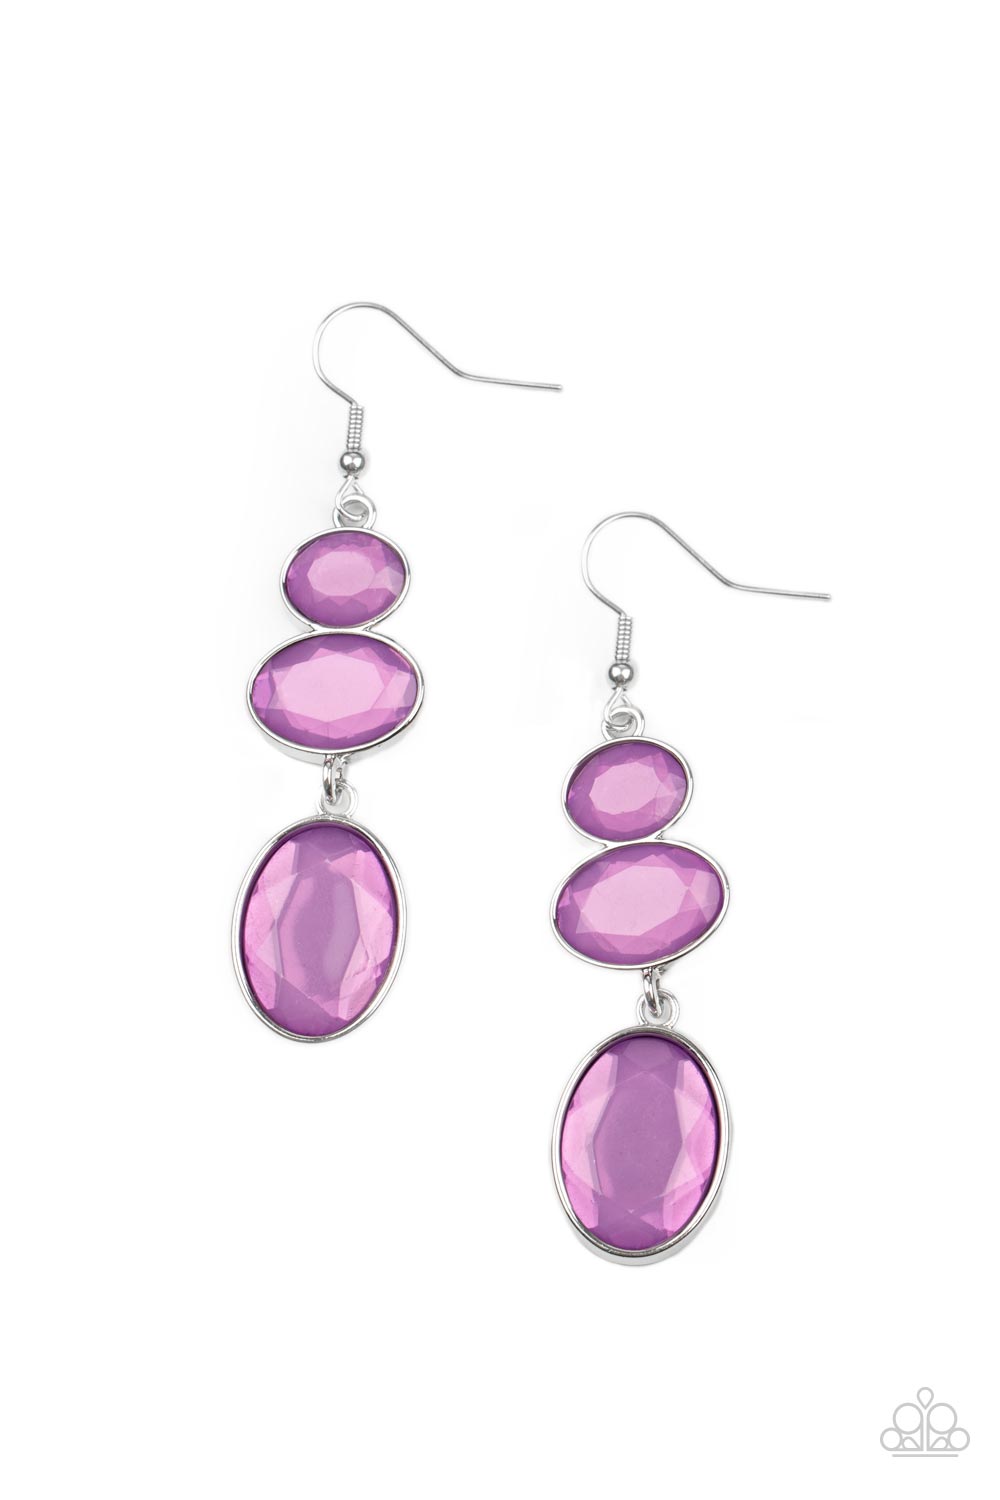 Paparazzi Accessories Tiers of Tranquility - Purple Earrings - Lady T Accessories